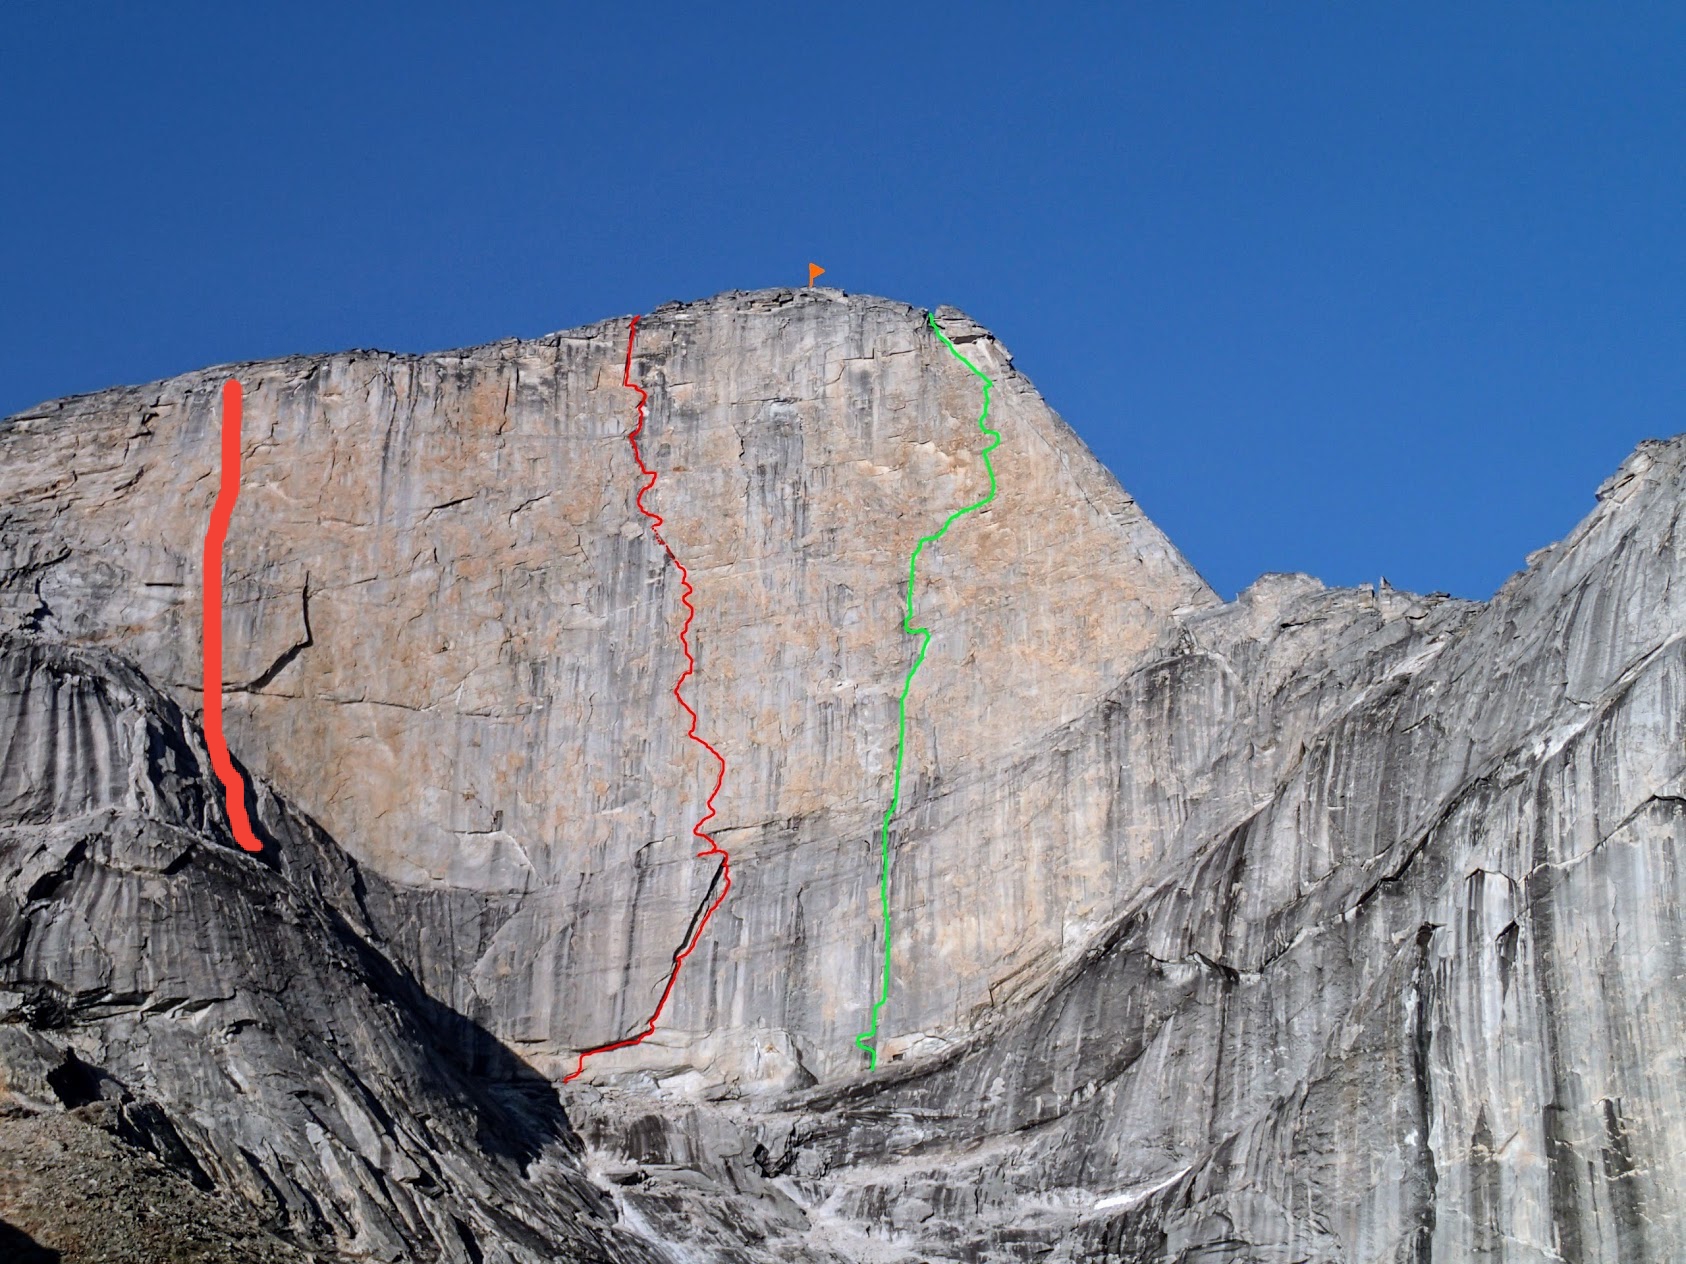 The west face of Xanadu: Golden Petals (V 5.13+ or 5.12 A0, 14 pitches) is marked in green on the right, Une pas mes (VI 5.10b A4/A4+, 11 pitches) is marked by the thin red line at center; the third route, Arctic Knight (V 5.11+, 7 pitches, ca. 1,600'), is marked in a thicker red line to the left of the previous two. [Photo] Engberg, Bain, Boning and Braasch collection